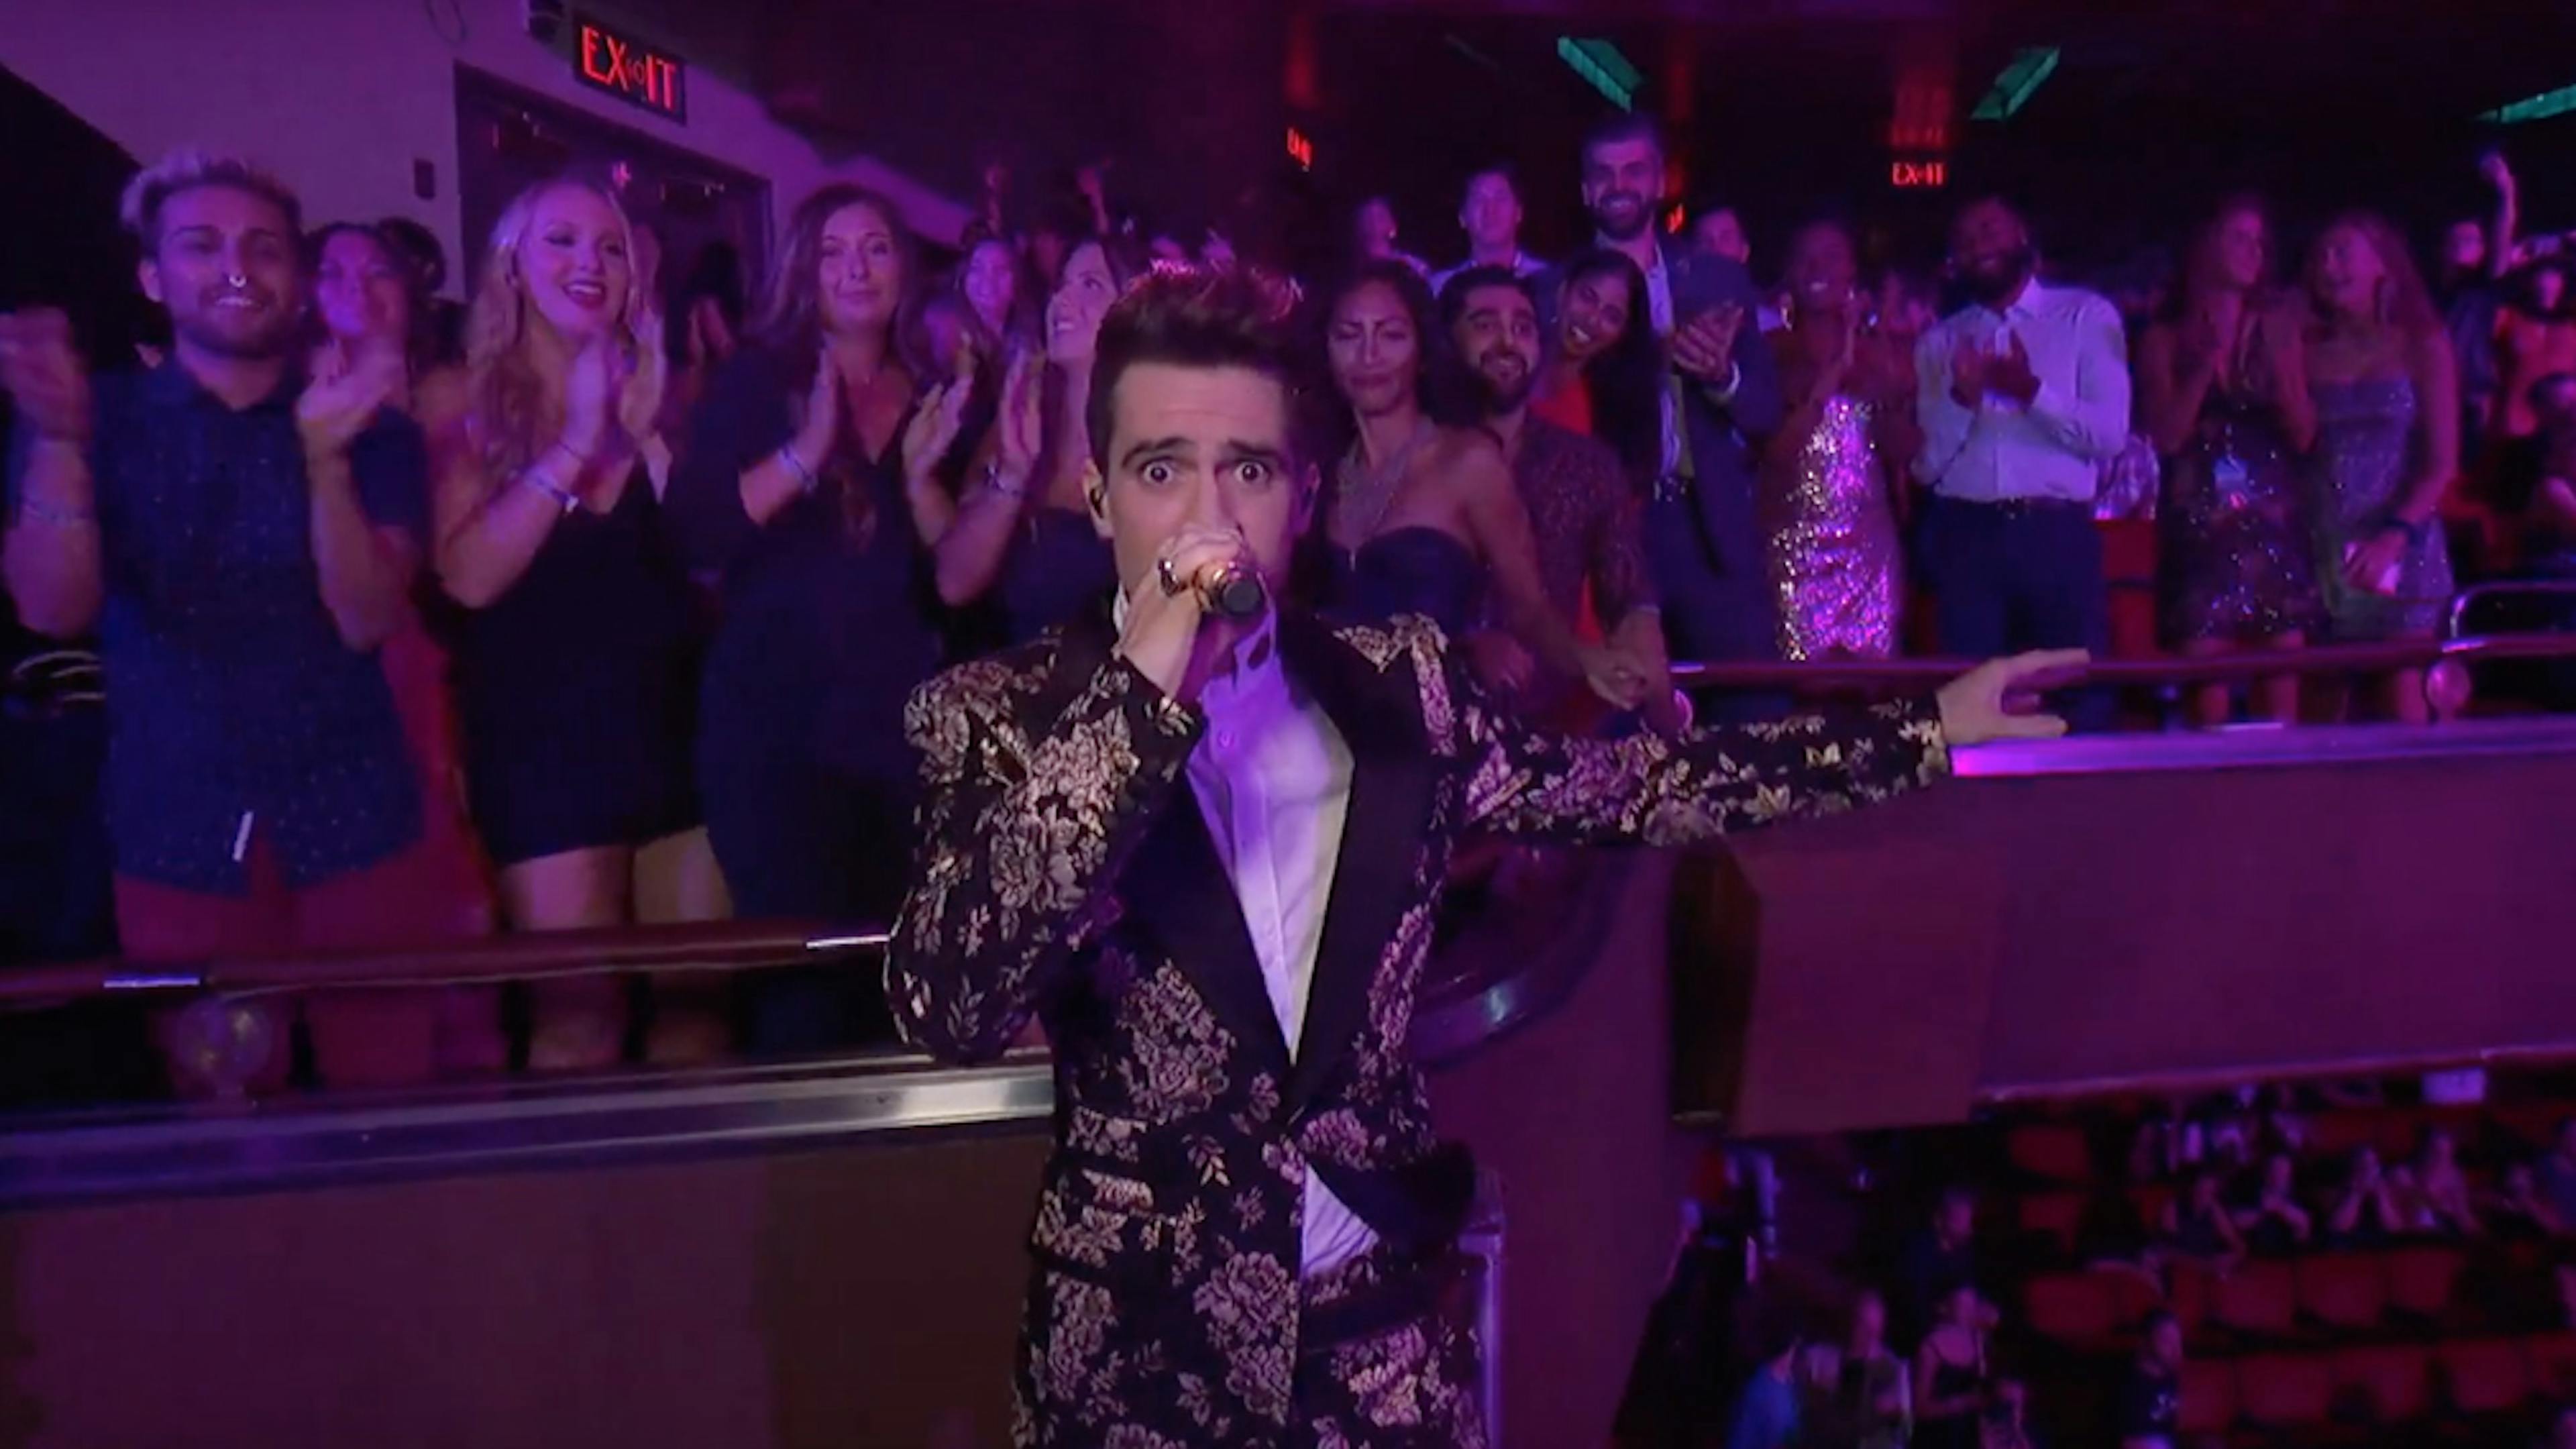 Watch Panic! At The Disco Perform At The 2018 MTV Video Music Awards